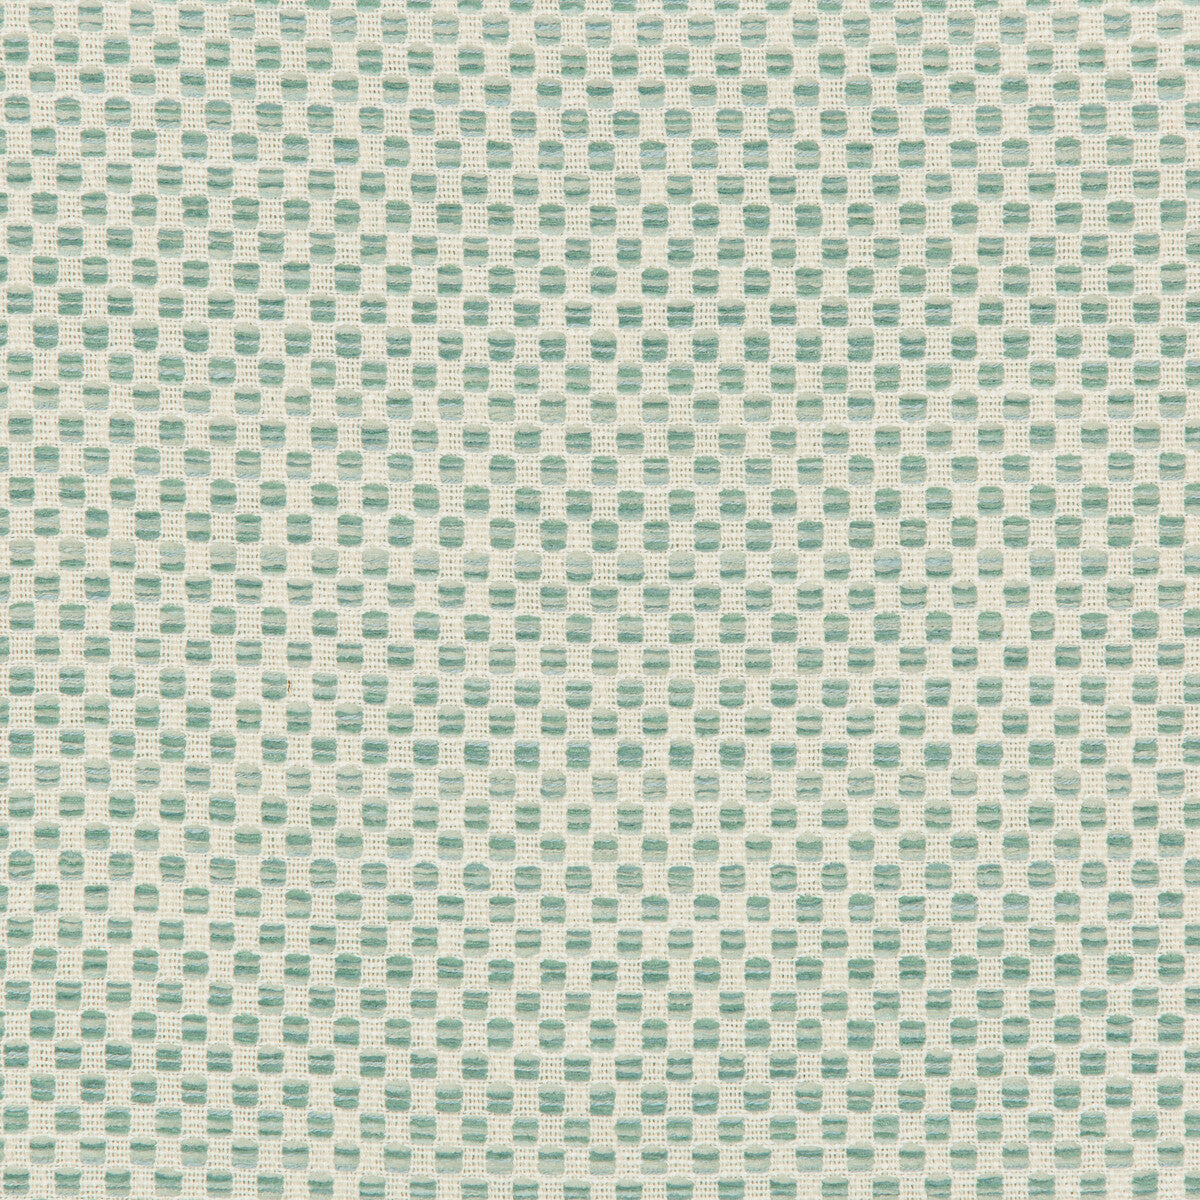 Kravet Design fabric in 36090-15 color - pattern 36090.15.0 - by Kravet Design in the Inside Out Performance Fabrics collection